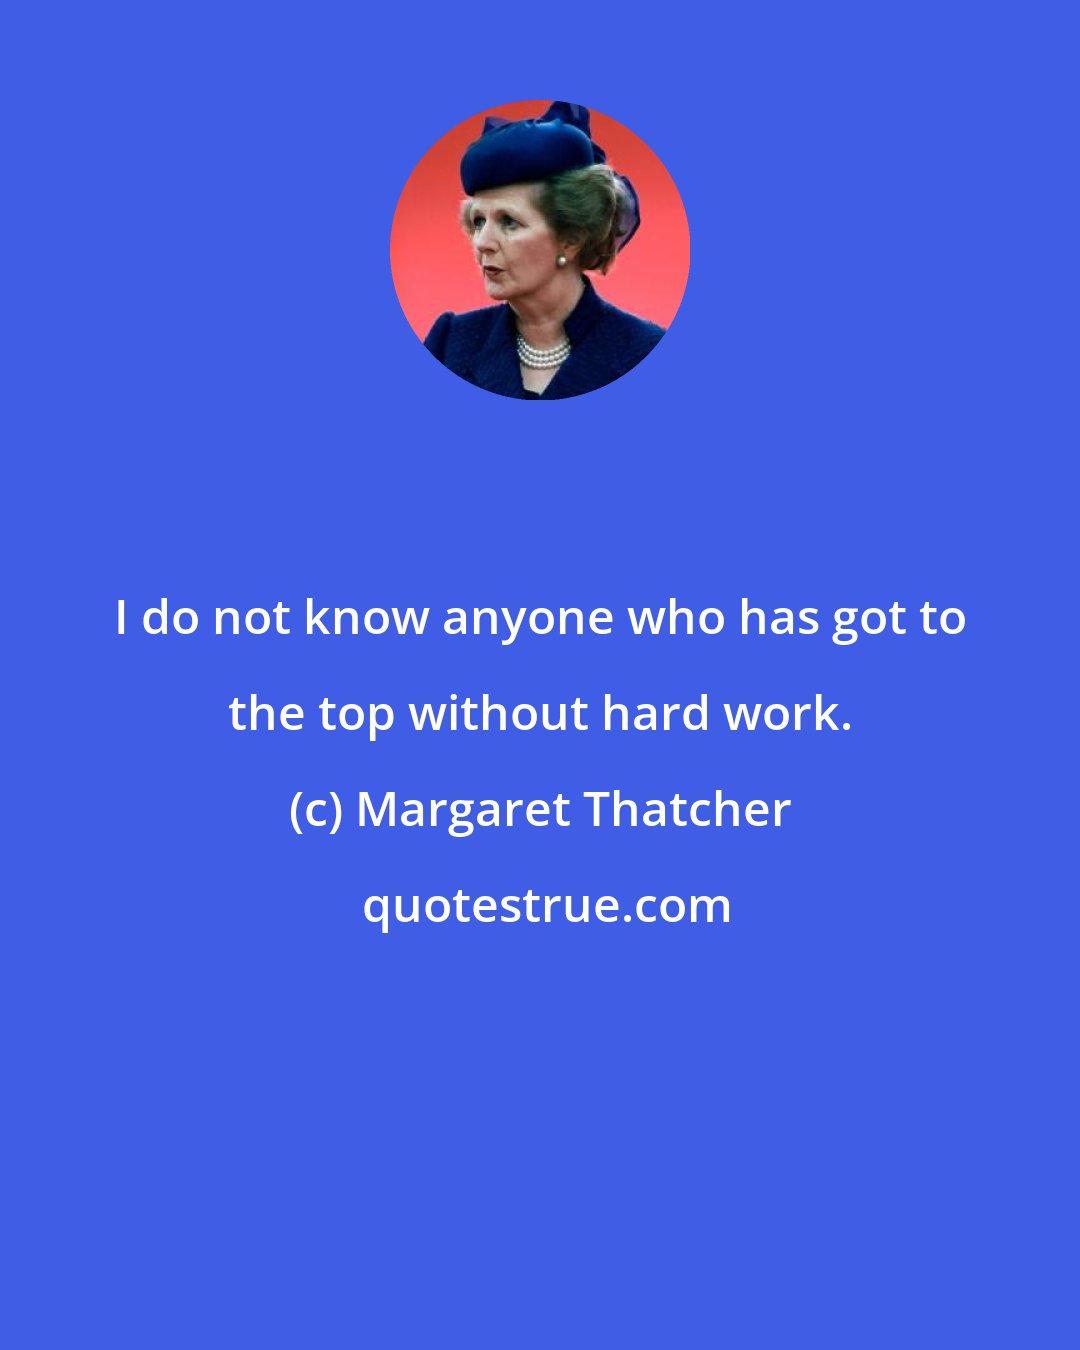 Margaret Thatcher: I do not know anyone who has got to the top without hard work.